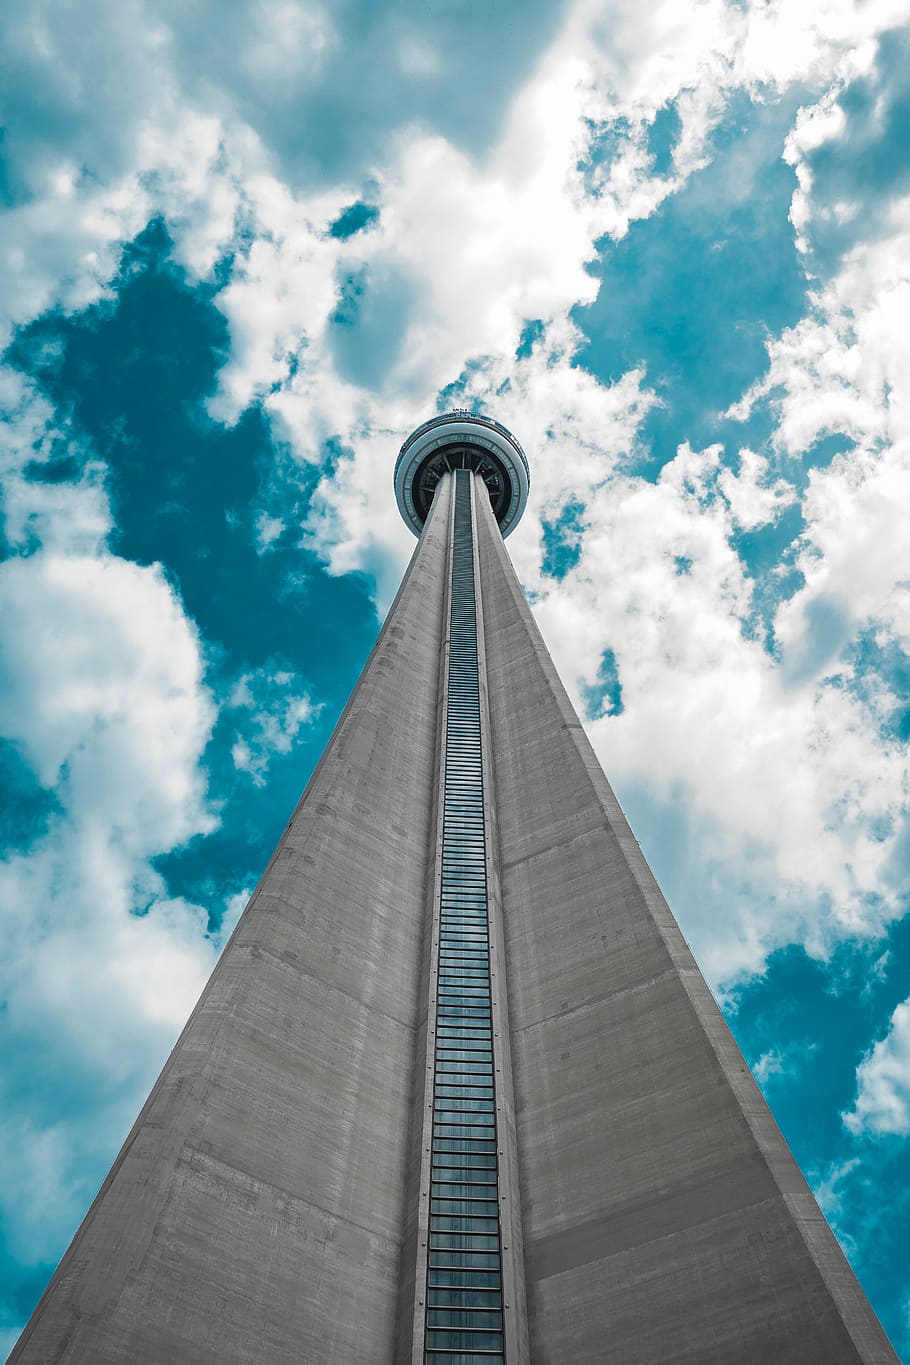 architectural, photography, gray, building, architecture, infrastructure, blue, sky, skyscraper, tower